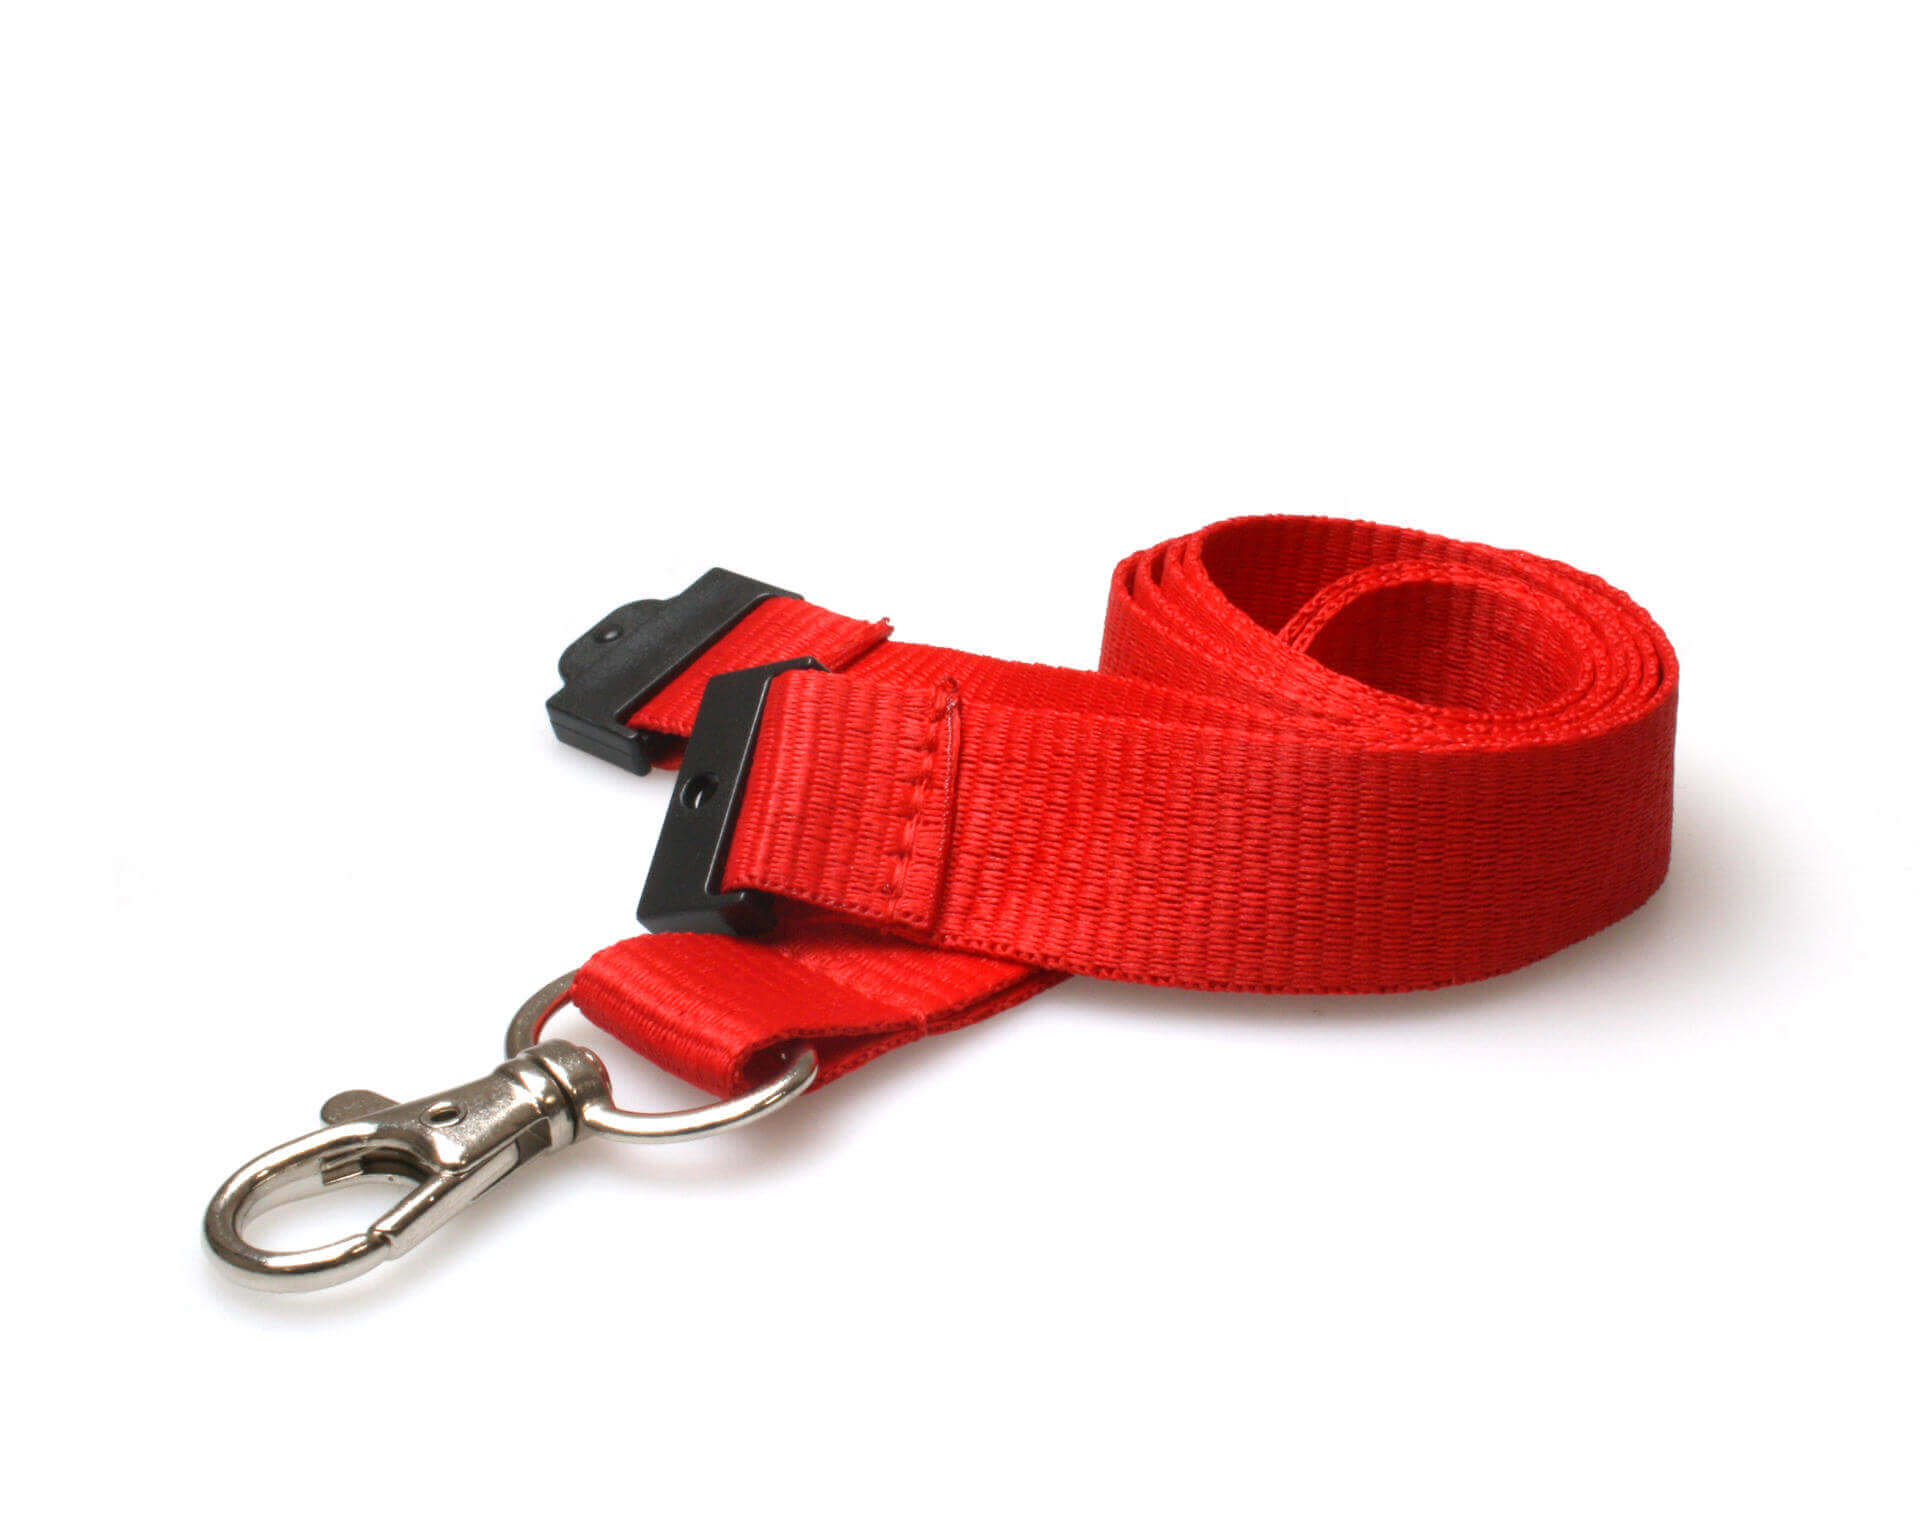 20mm Red Lanyards (100 Pack) - Trigger Clip and Safety Breakaway